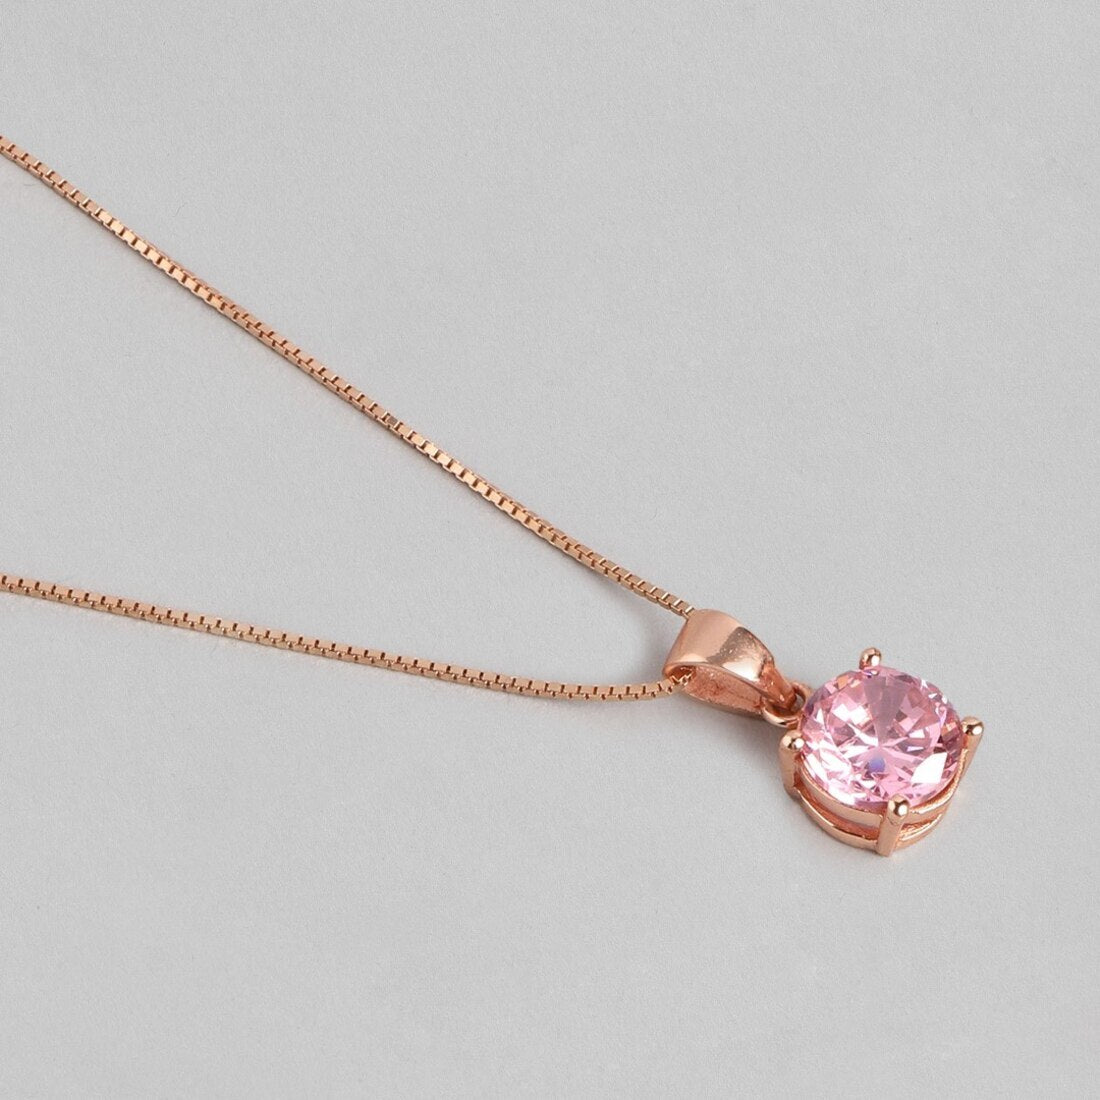 Rose Gold Elegance 925 Sterling Silver Pendant With Red Cubic Zirconia